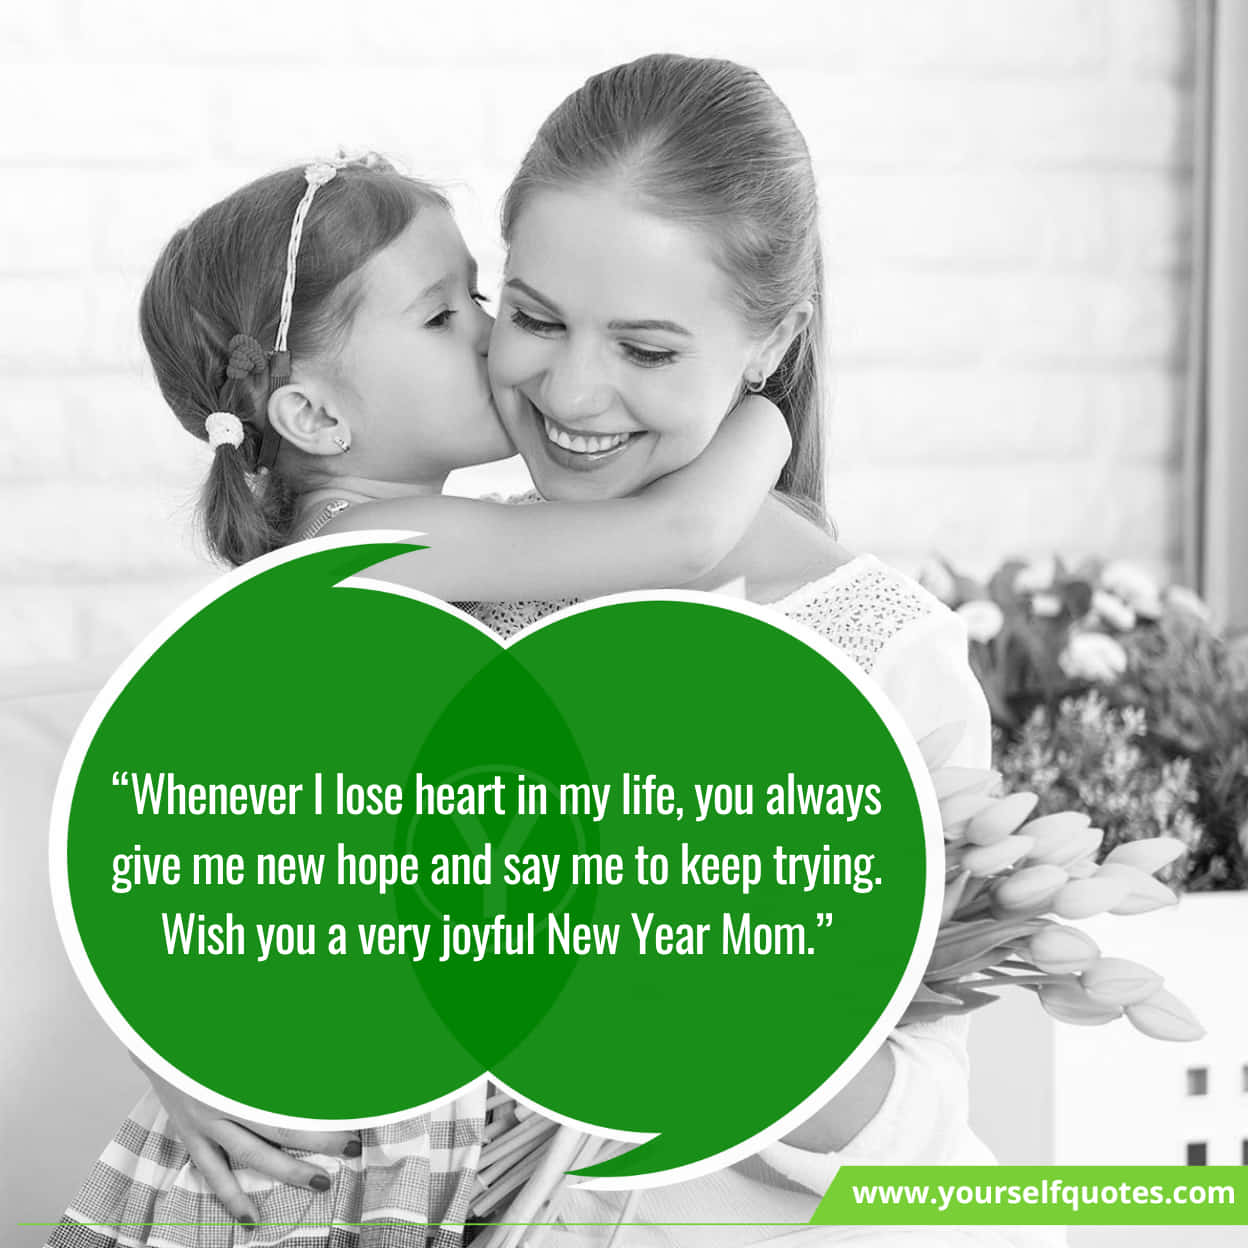 New Year Messages for your Mother